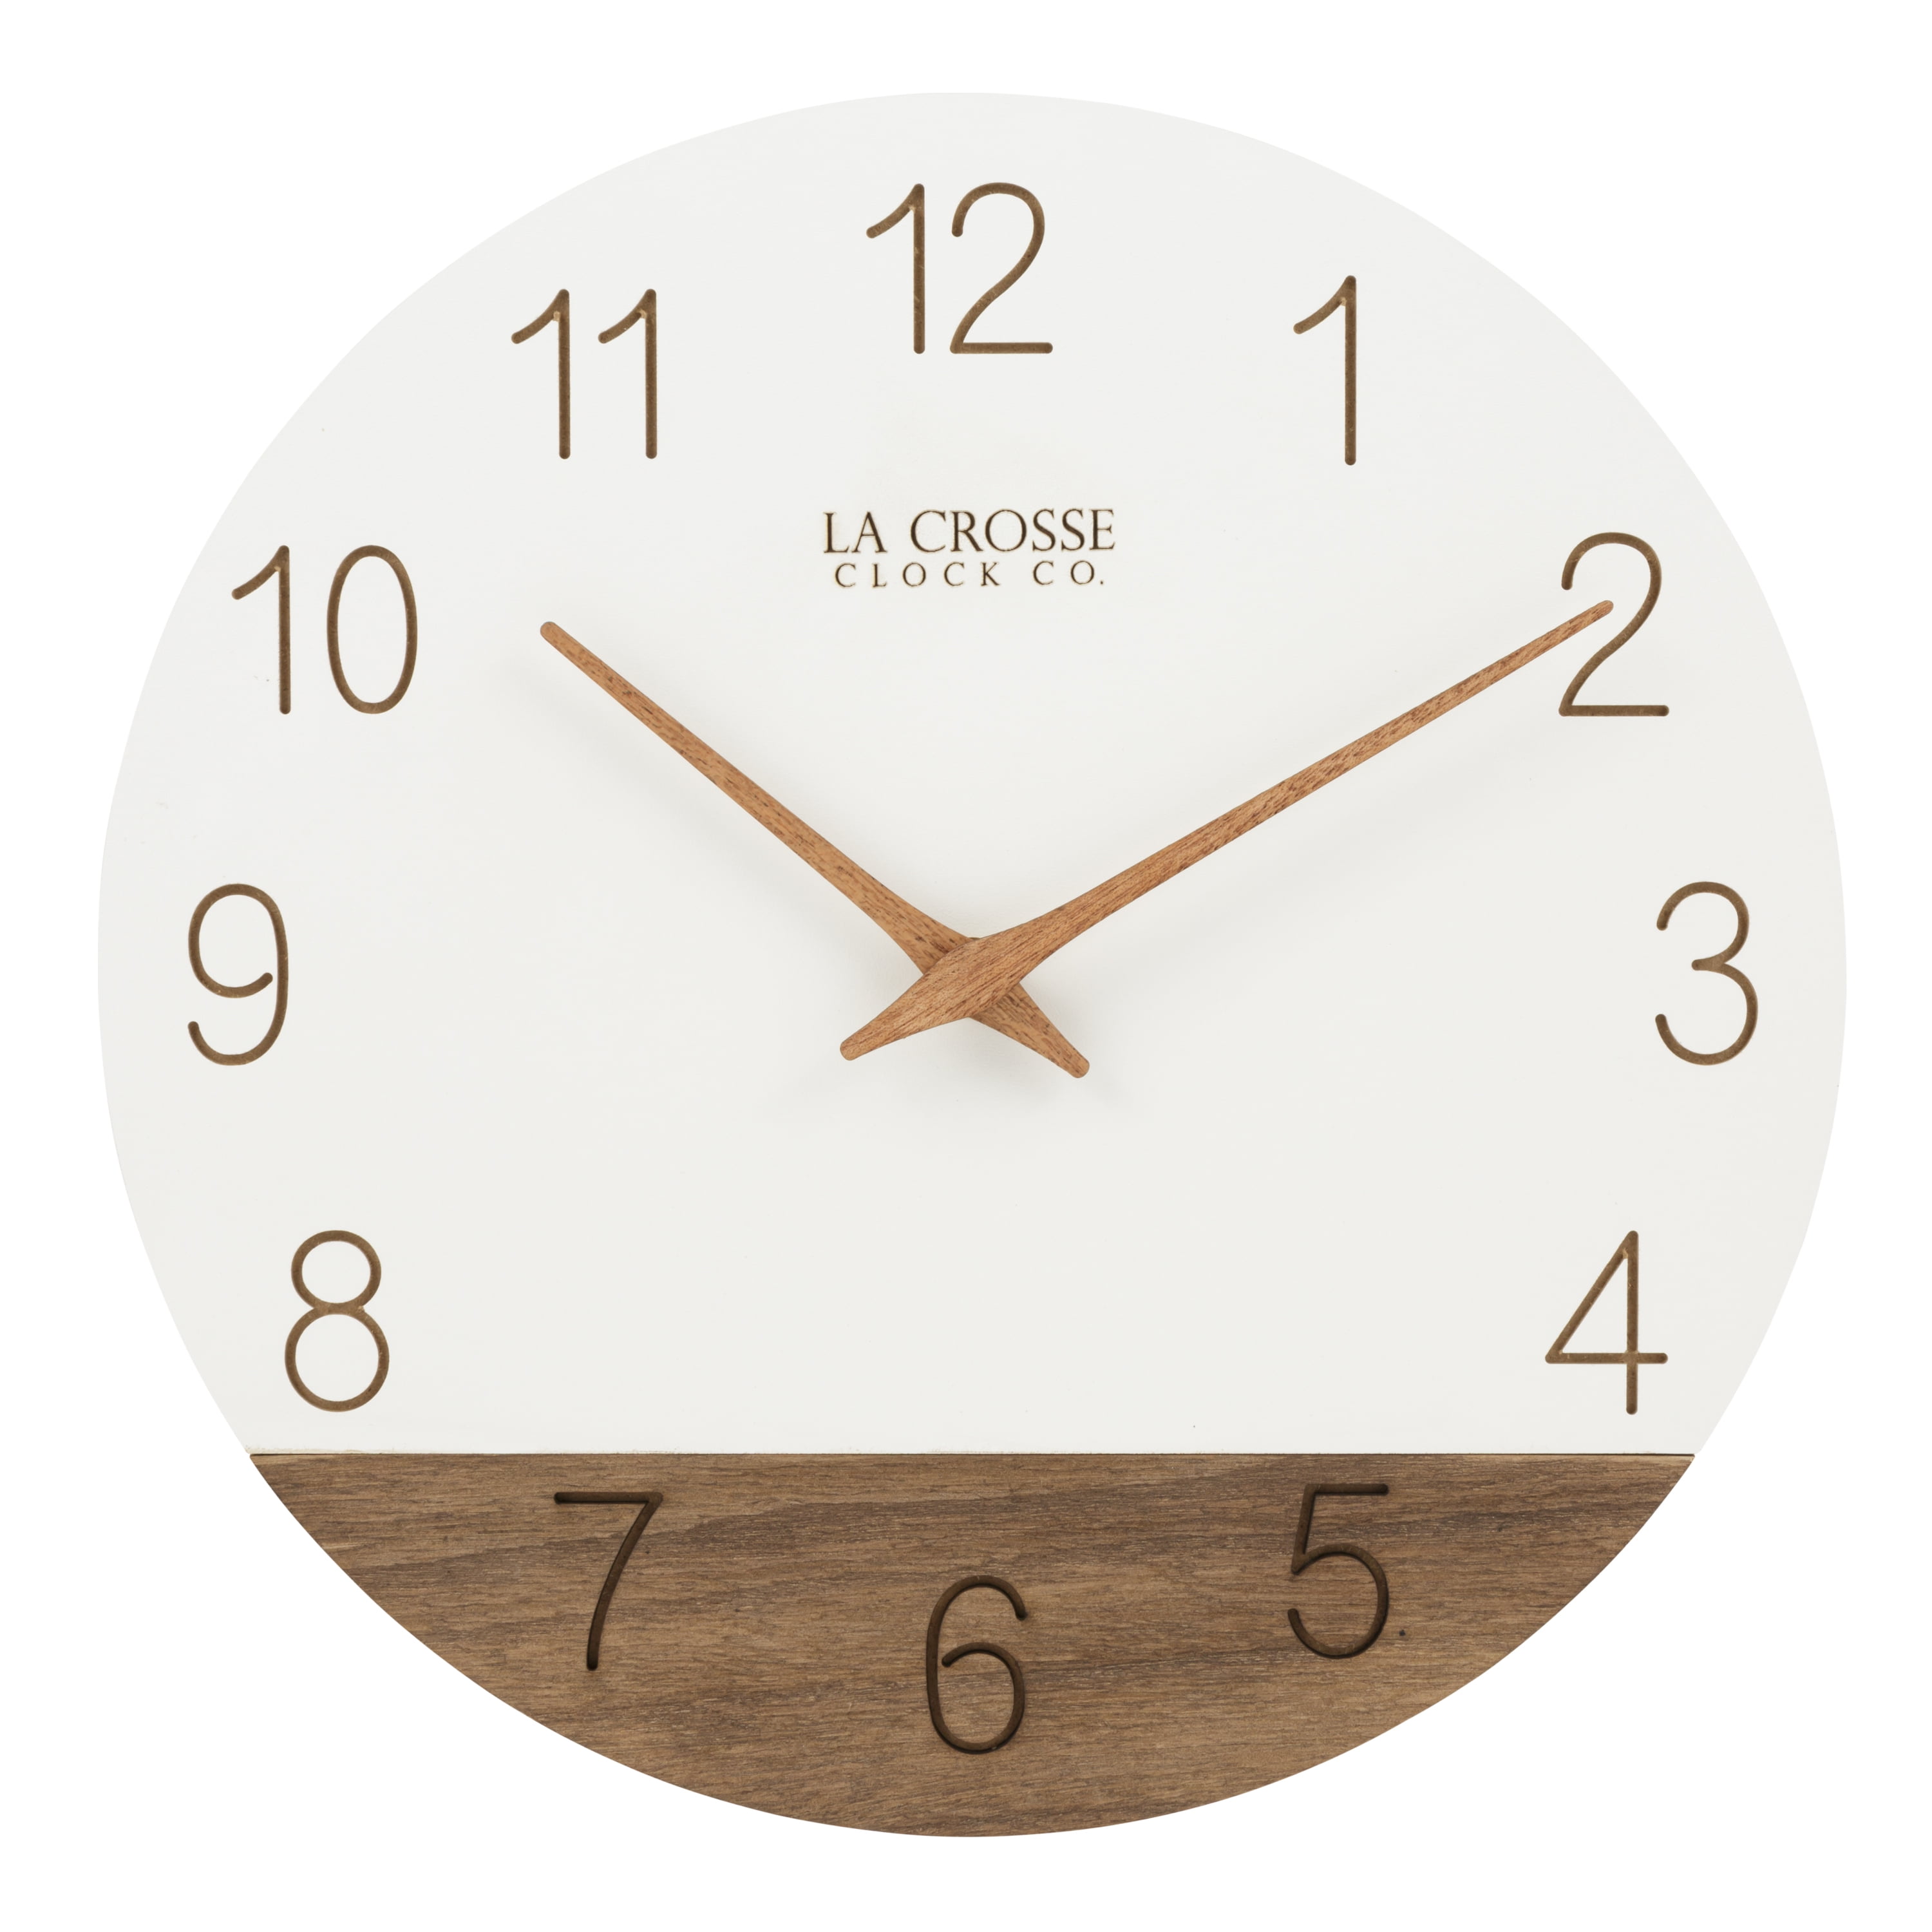 Wall Clock 12 Inch Night Light Function Wooden Wall Clock Vintage Rustic Country Tuscan Style for Kitchen Office Home Silent & Non-Ticking Battery Operated Silent Quartz Decor Clock